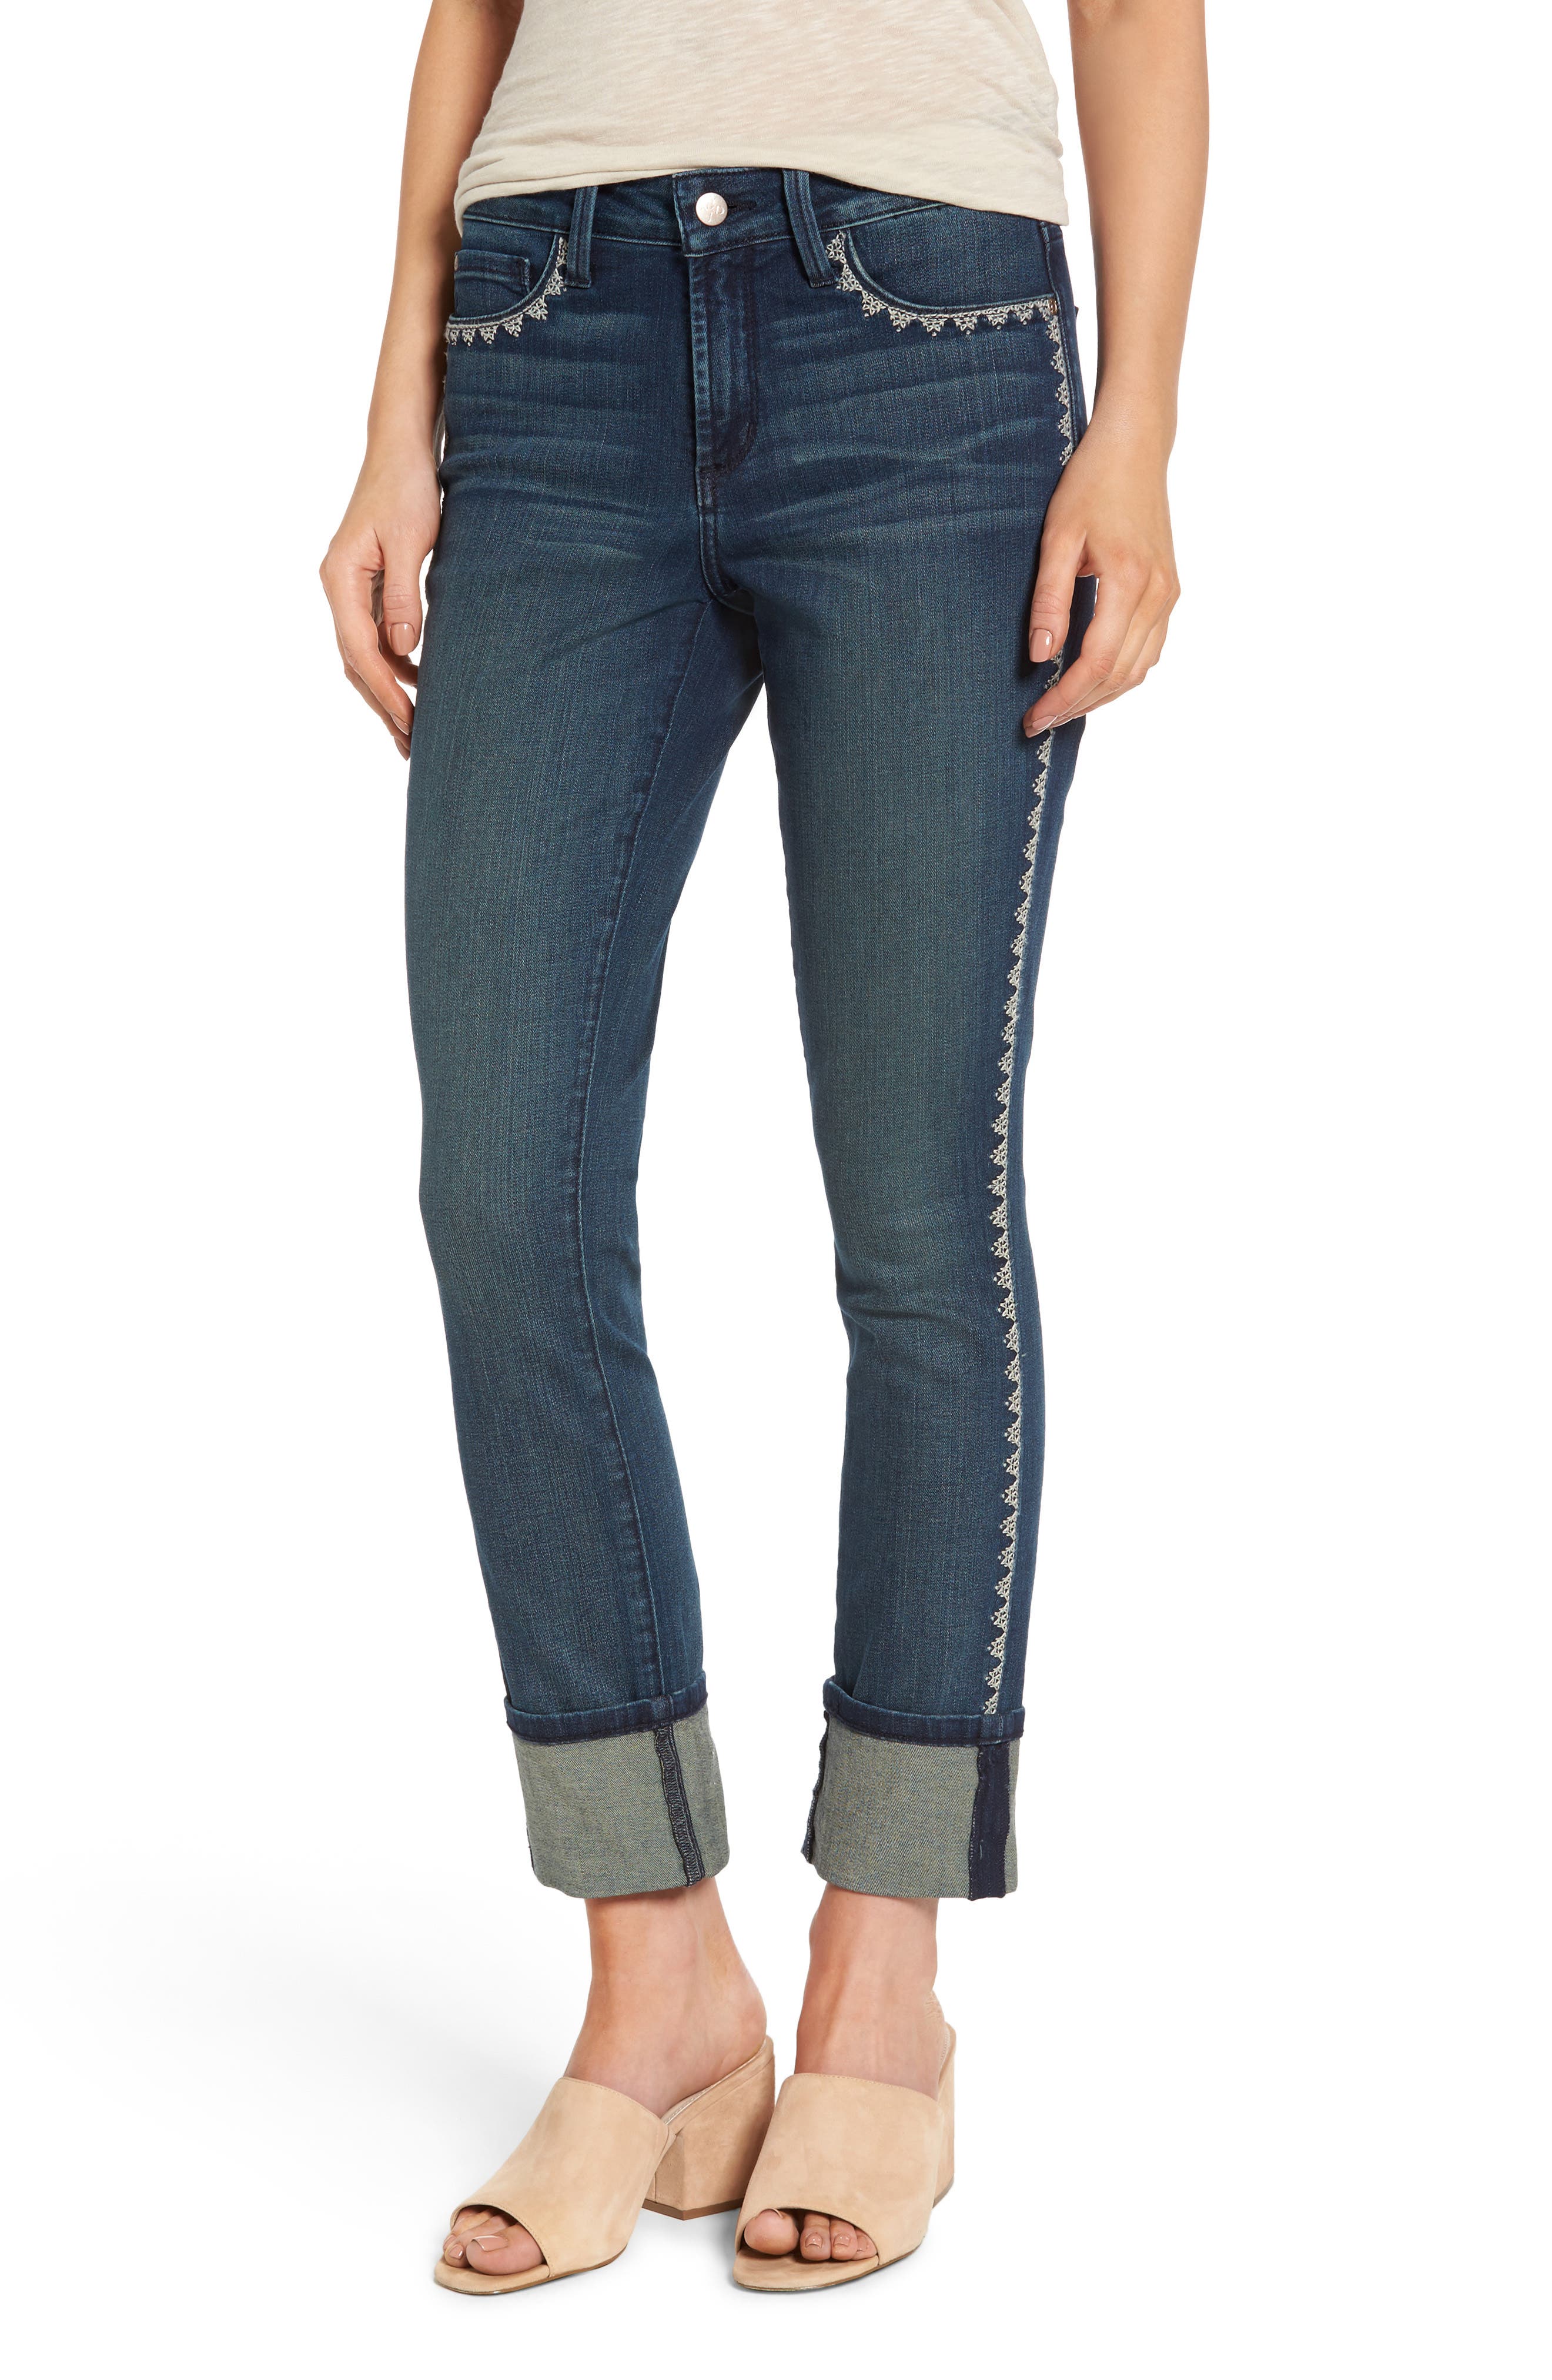 jeans with elastic ankle cuff